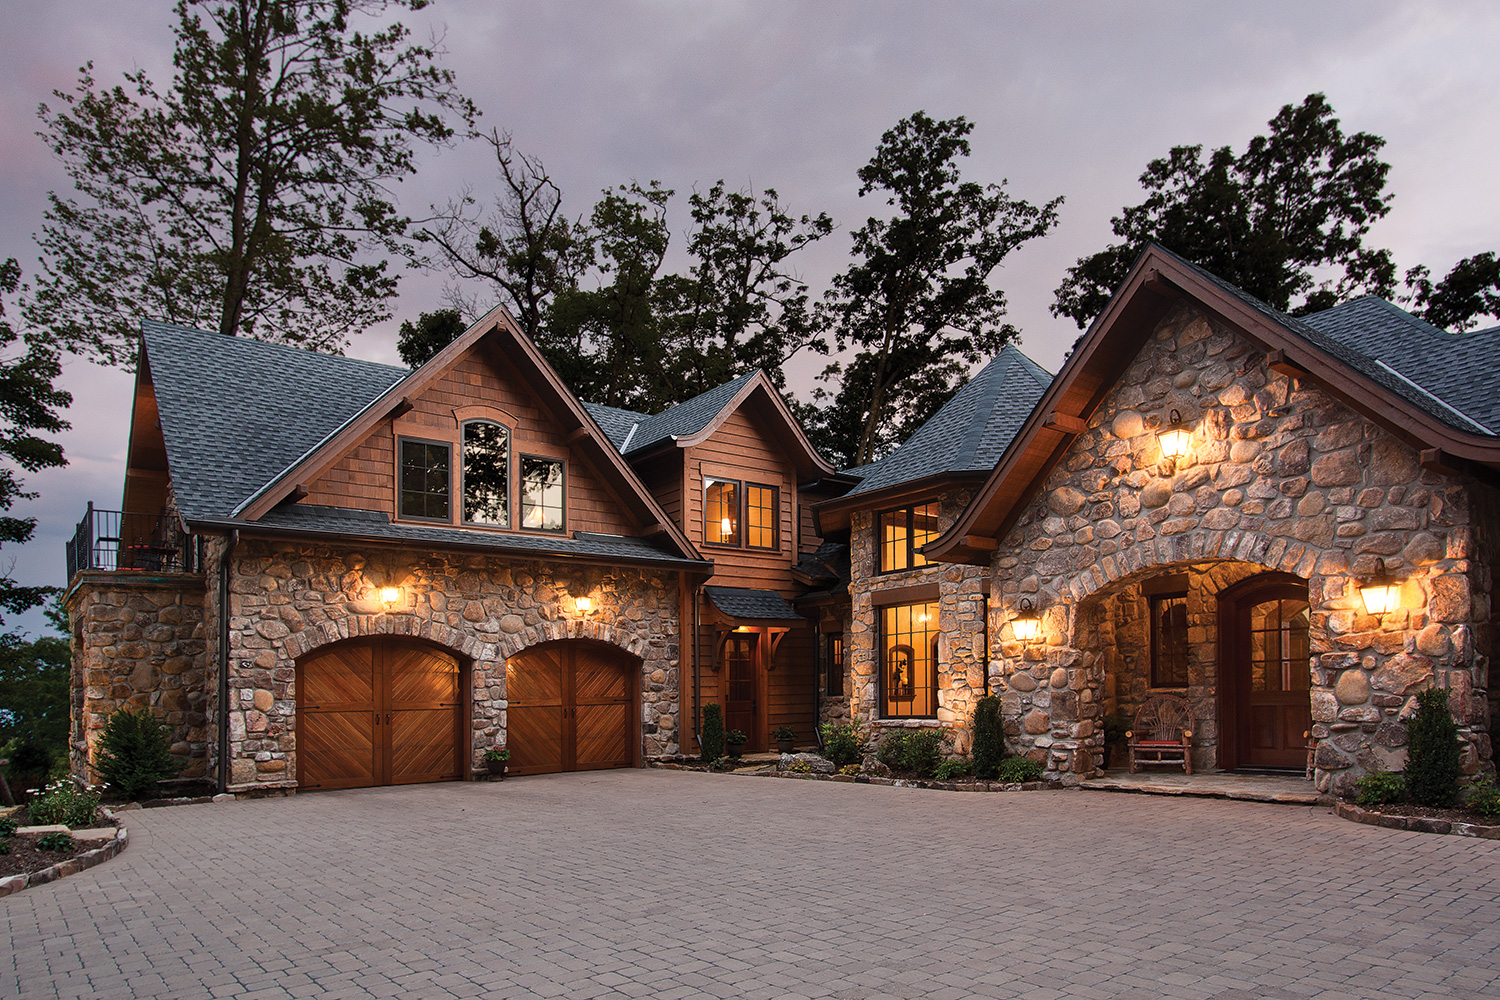 Both inside and out, stone takes center stage at the Stahl residence. Flying eaves and curved arches are repeated throughout the design. From the stonework to the rooflines, these details give the residence a grand cottage feel. Construction by Morgan-Keefe Builders, Arden. Custom carpentry by Square Peg Construction. Design by Cornerstone Design Studio, Atlanta. Steep Creek Stoneworks of Brevard laid the stonework. Photo by J. Weiland